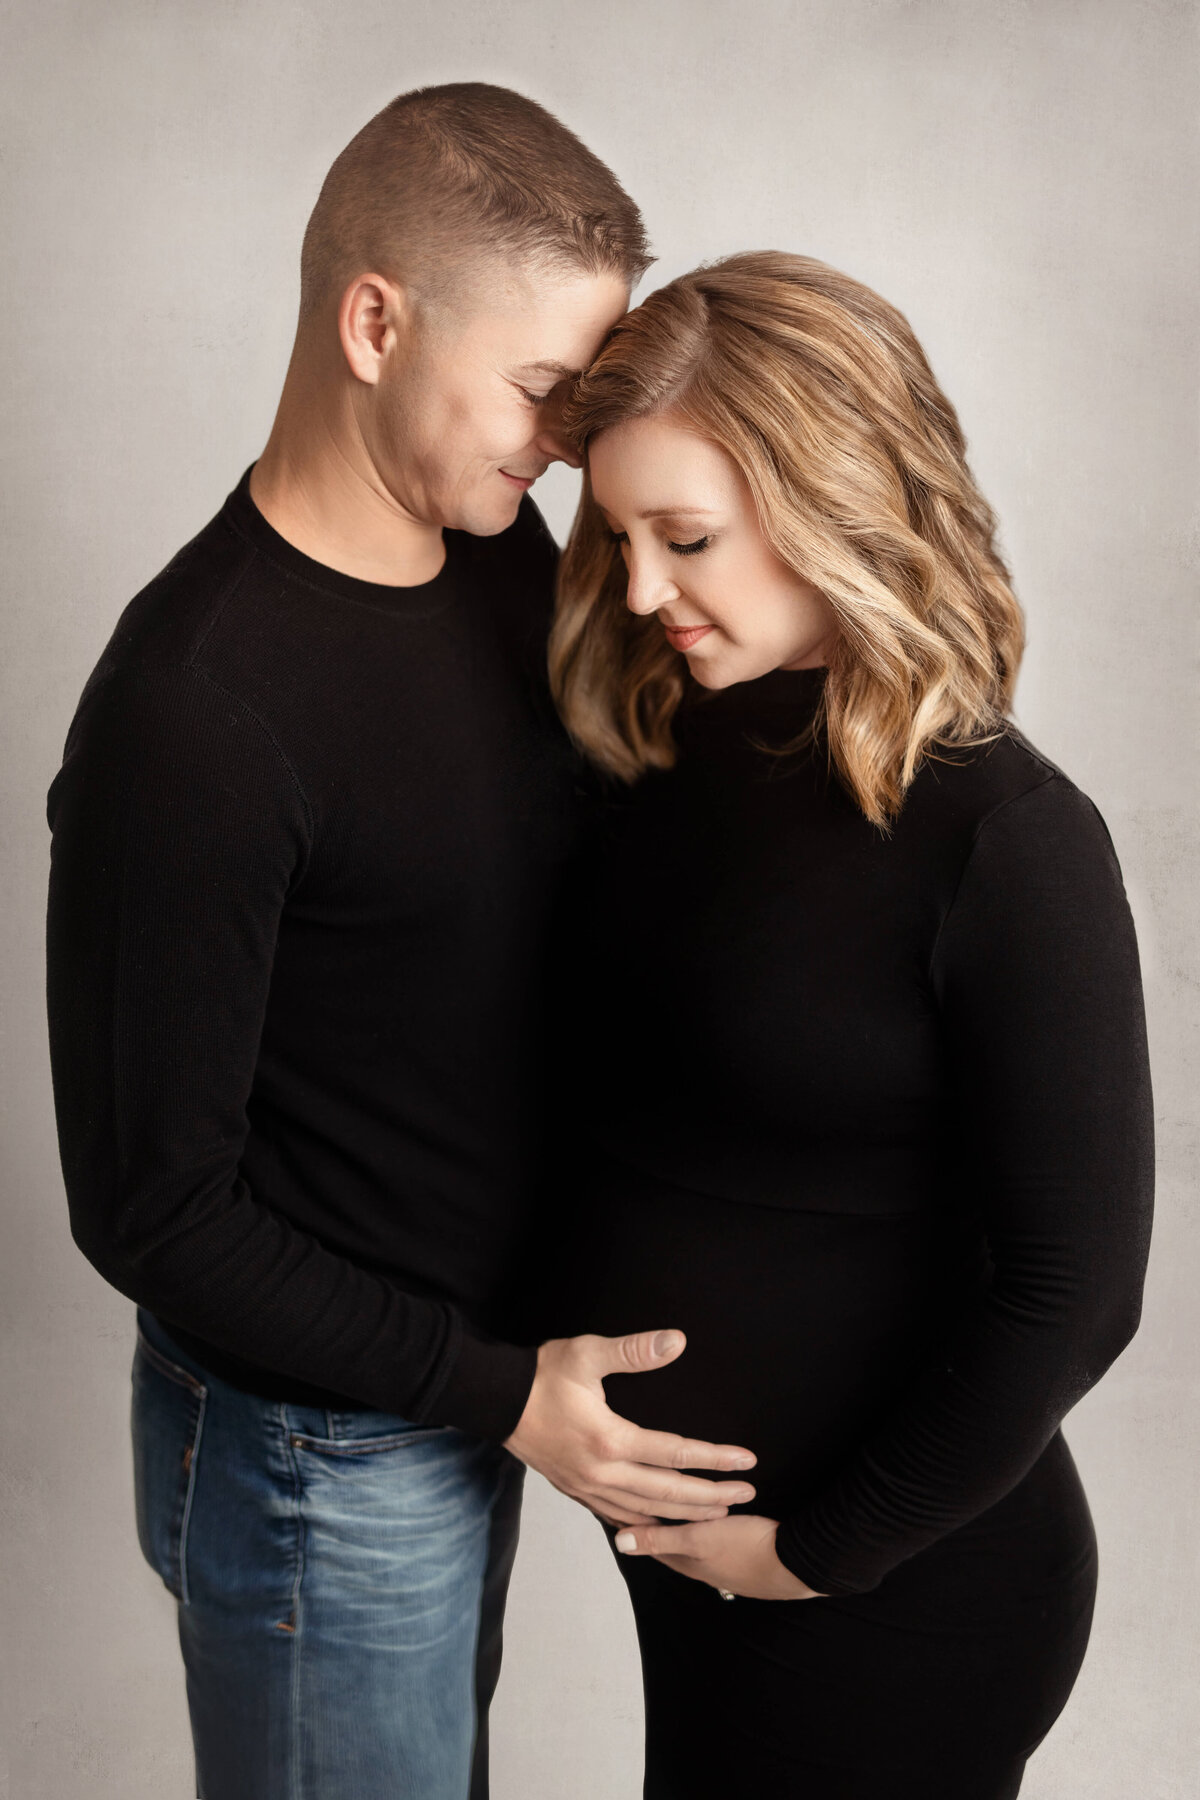 pregnant mom in a black dess looking down at her belly while he husband looks down holding her baby bump